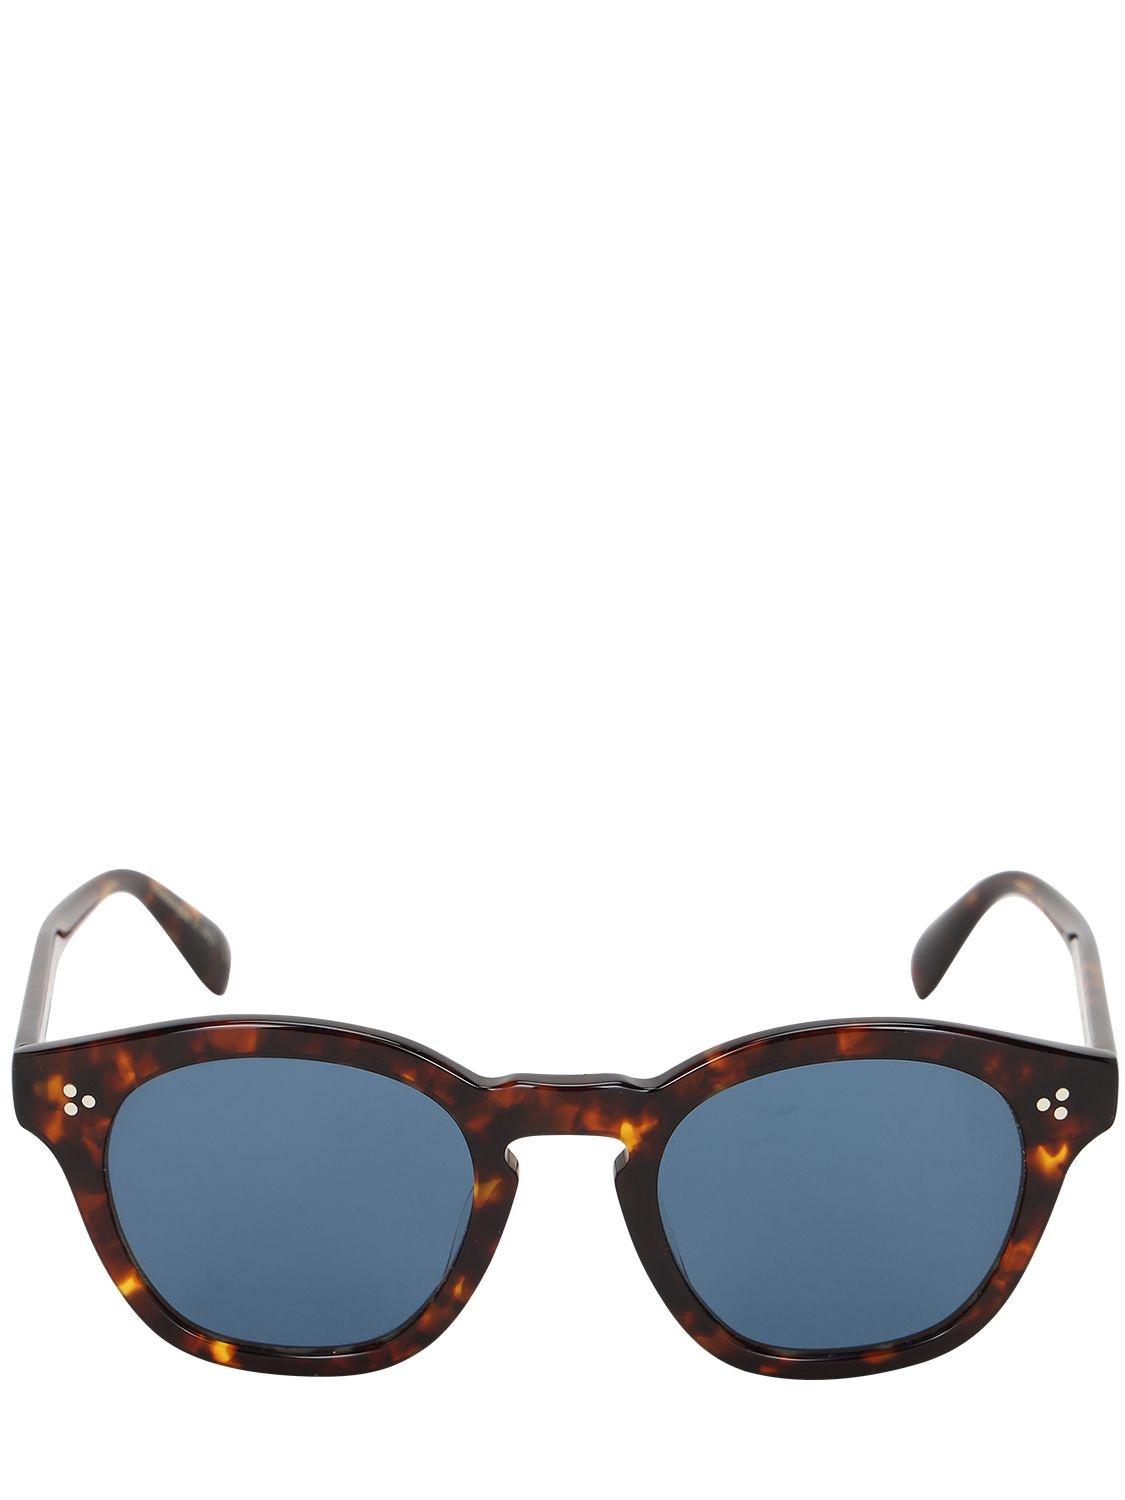 Oliver Peoples Boudreau L.a Round Acetate Sunglasses In Tortoiseshell,blue